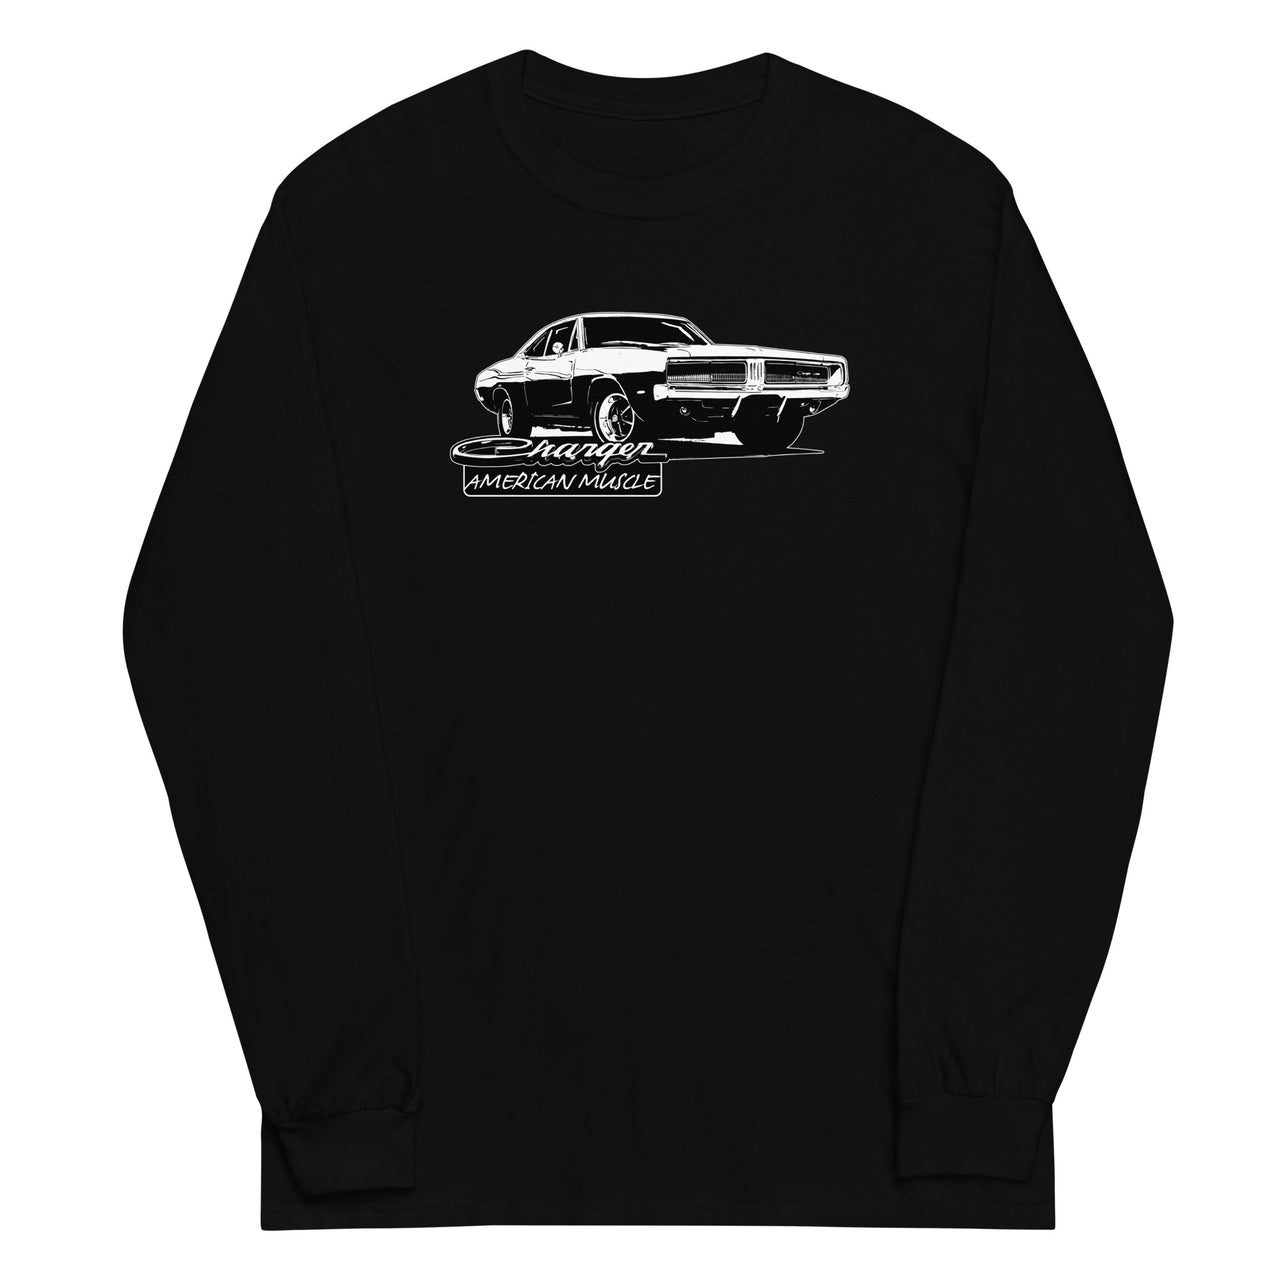 1969 Charger Long Sleeve Shirt in black